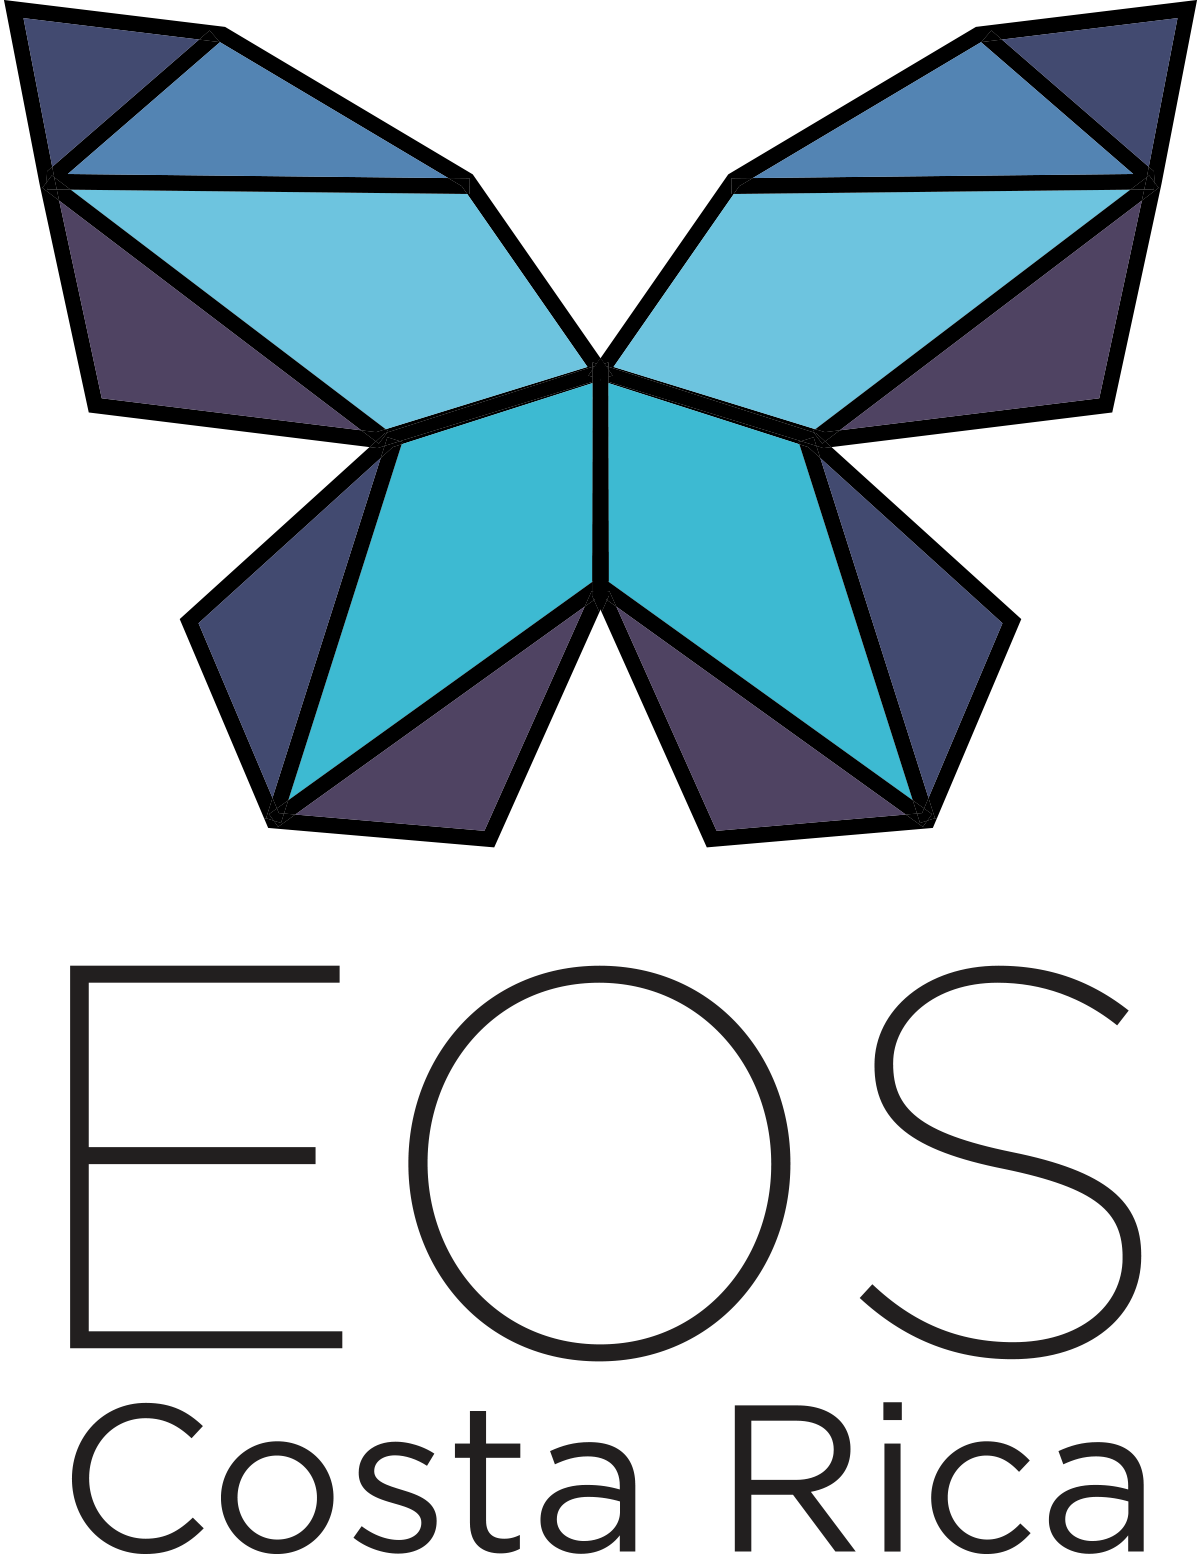 EOS Costa Rica logo vertical full color with transparent background